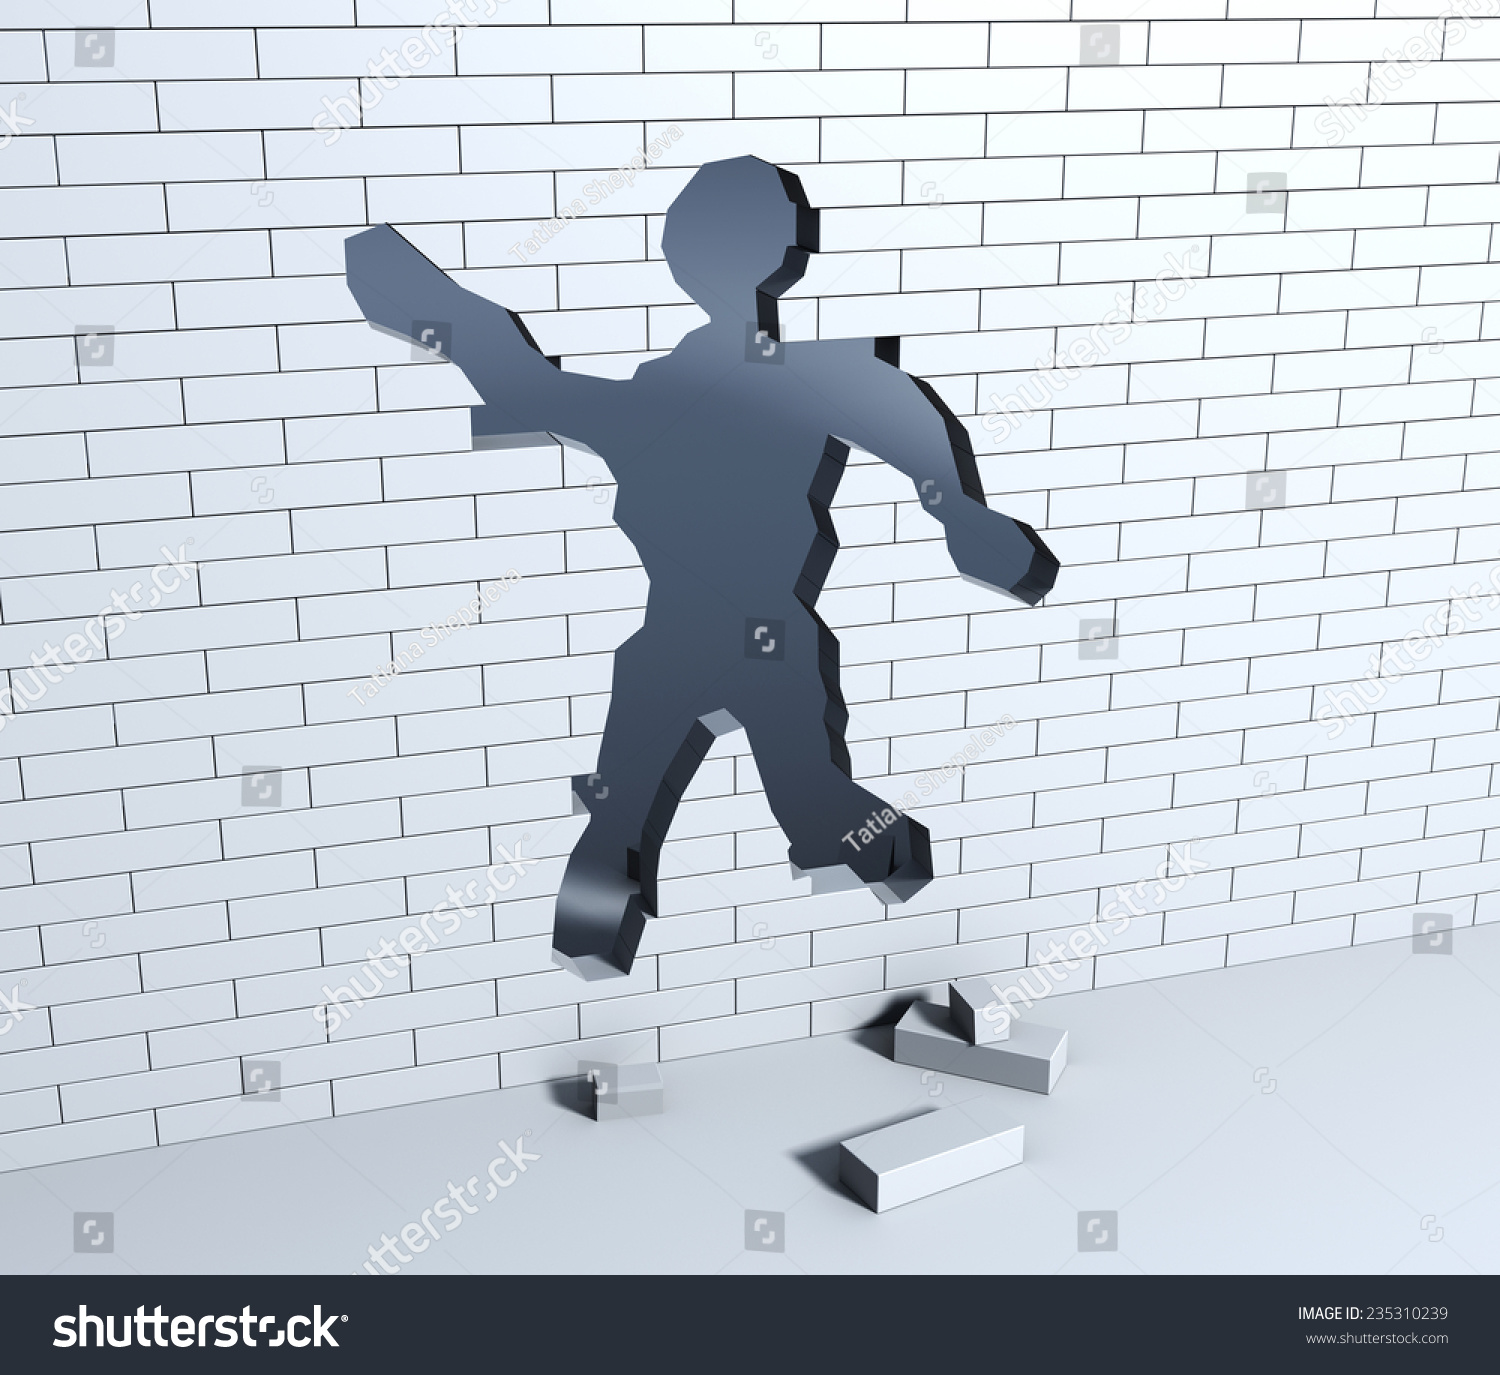 stock-photo-alternative-exit-hole-in-the-wall-in-the-form-of-a-silhouette-of-a-human-figure-235310239.jpg